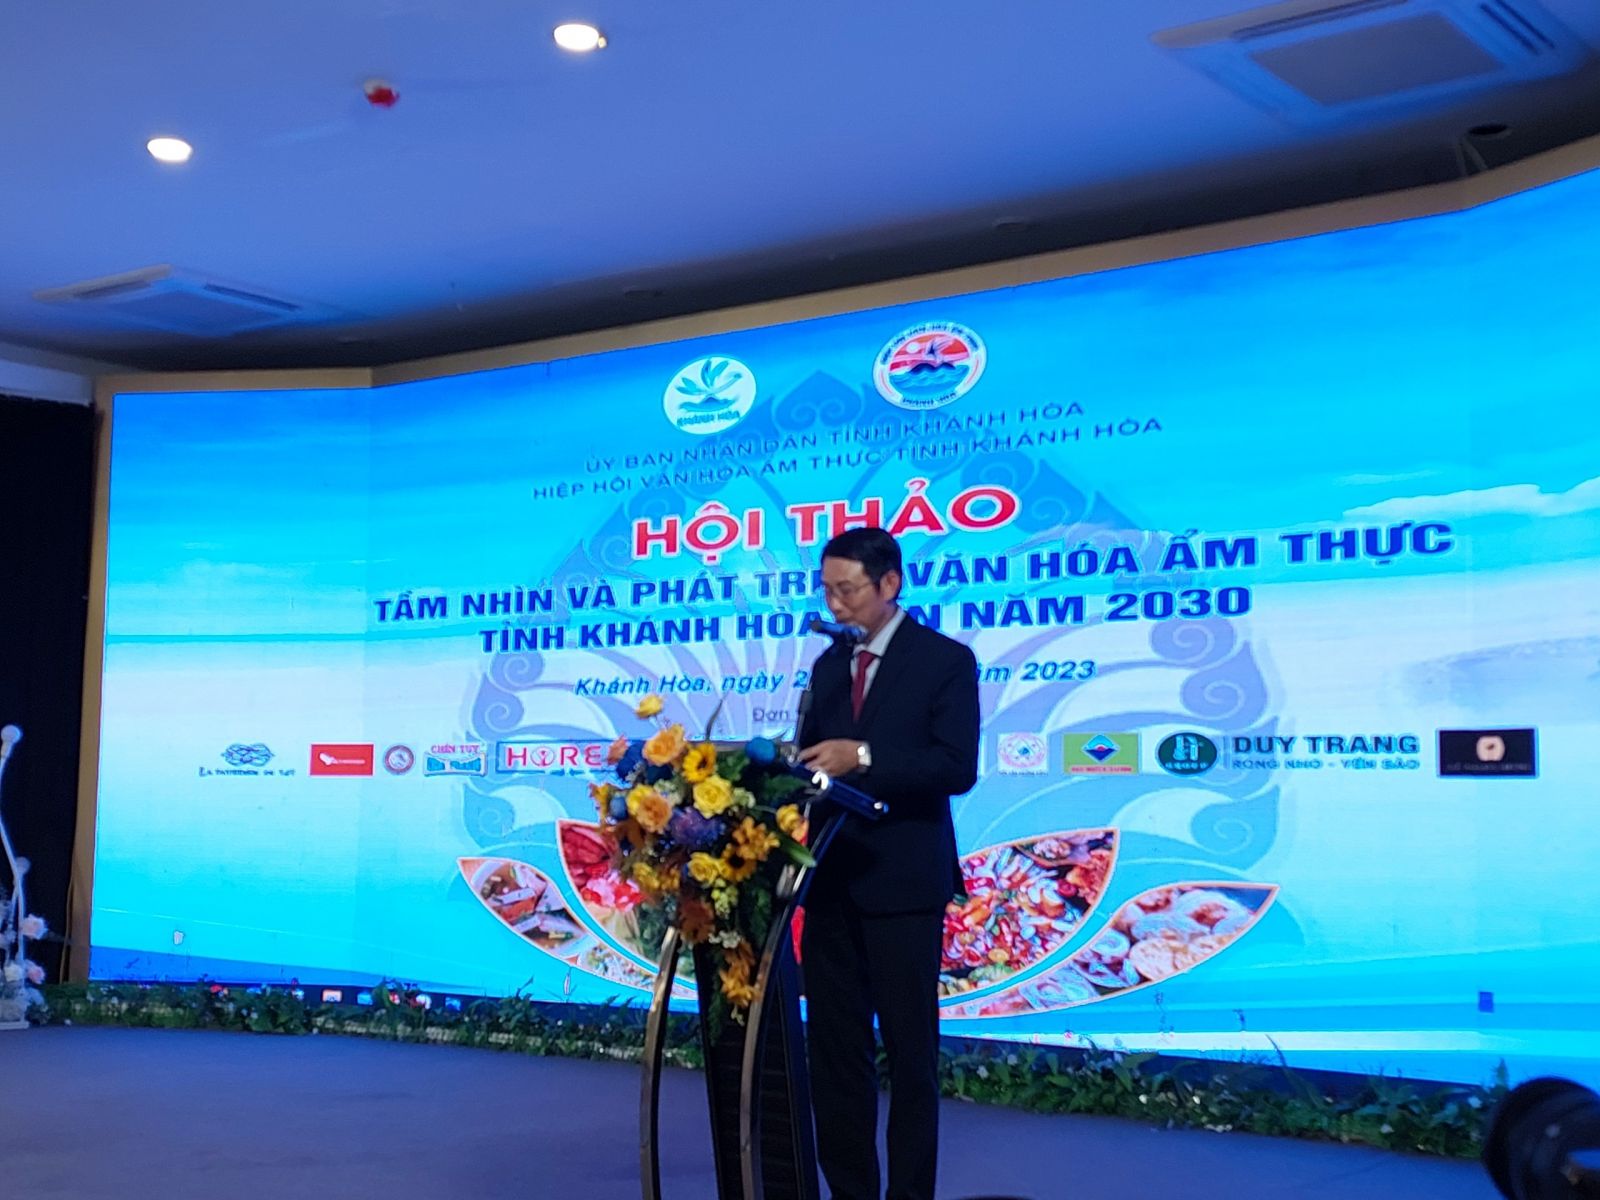 The Vietnam Cuisine Culture Association awards Certificate of 03 dishes of Khanh Hoa honored in the Journey to find typical culinary culture values of Vietnam